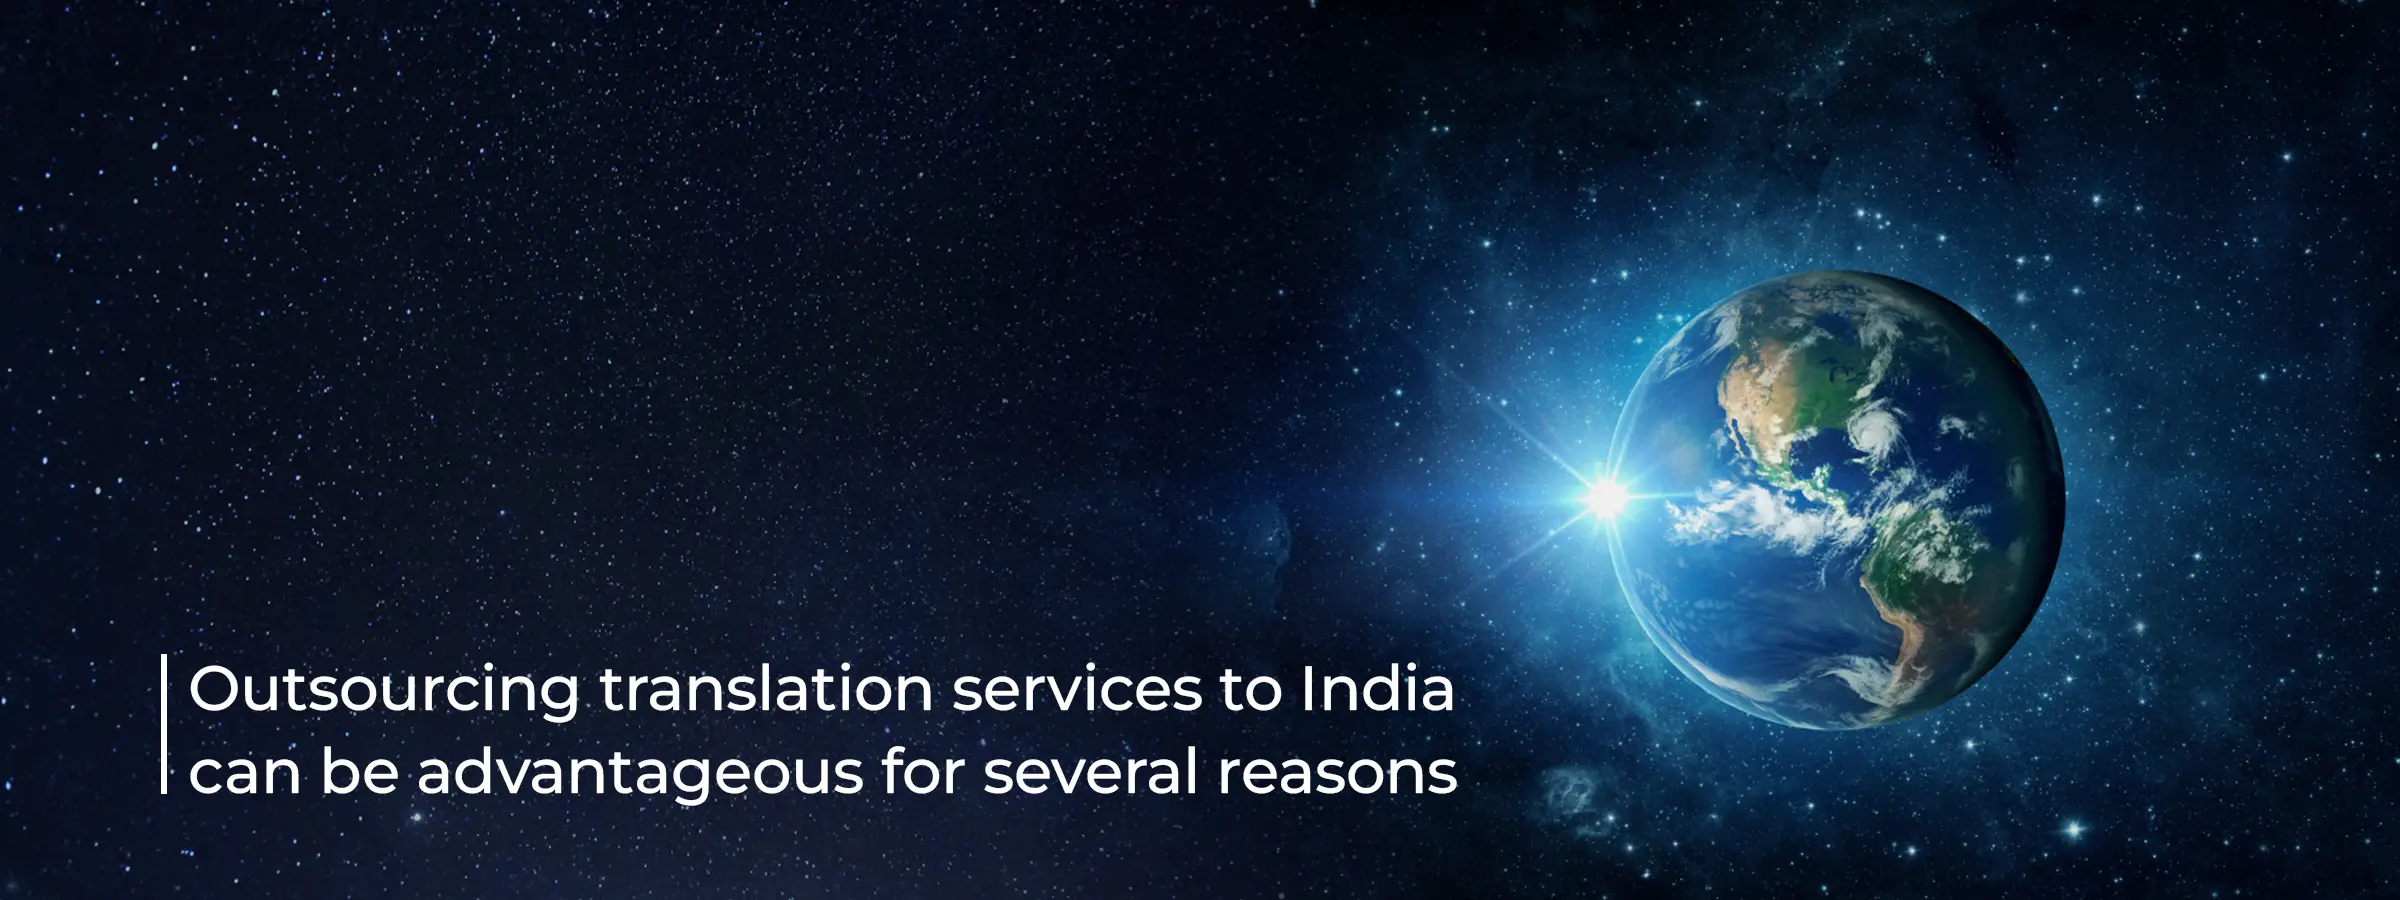 outsourcing-translation-services-to-India-blog-banner